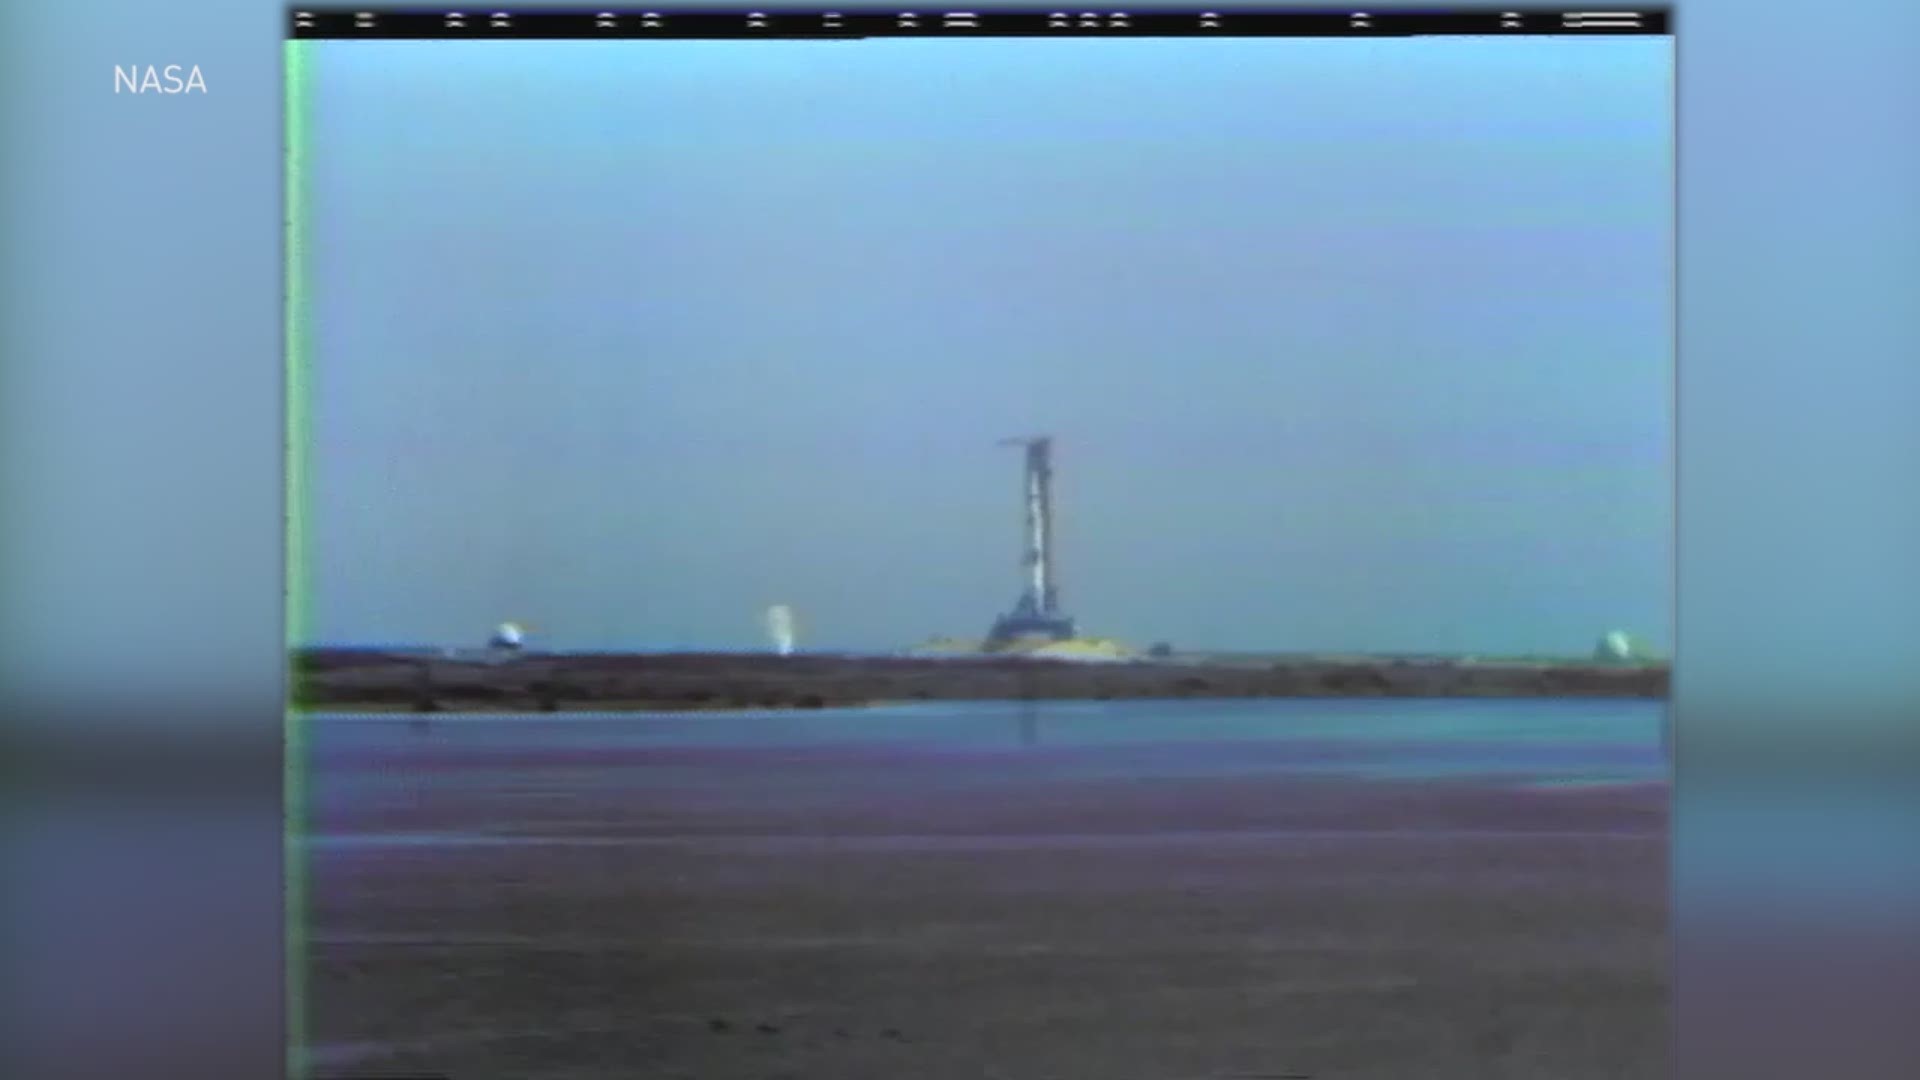 Listen as Jack King, who became known as NASA's 'Voice of Apollo,' counted down the last 60 seconds before the 1969 launch of Apollo 11. (Video: NASA)